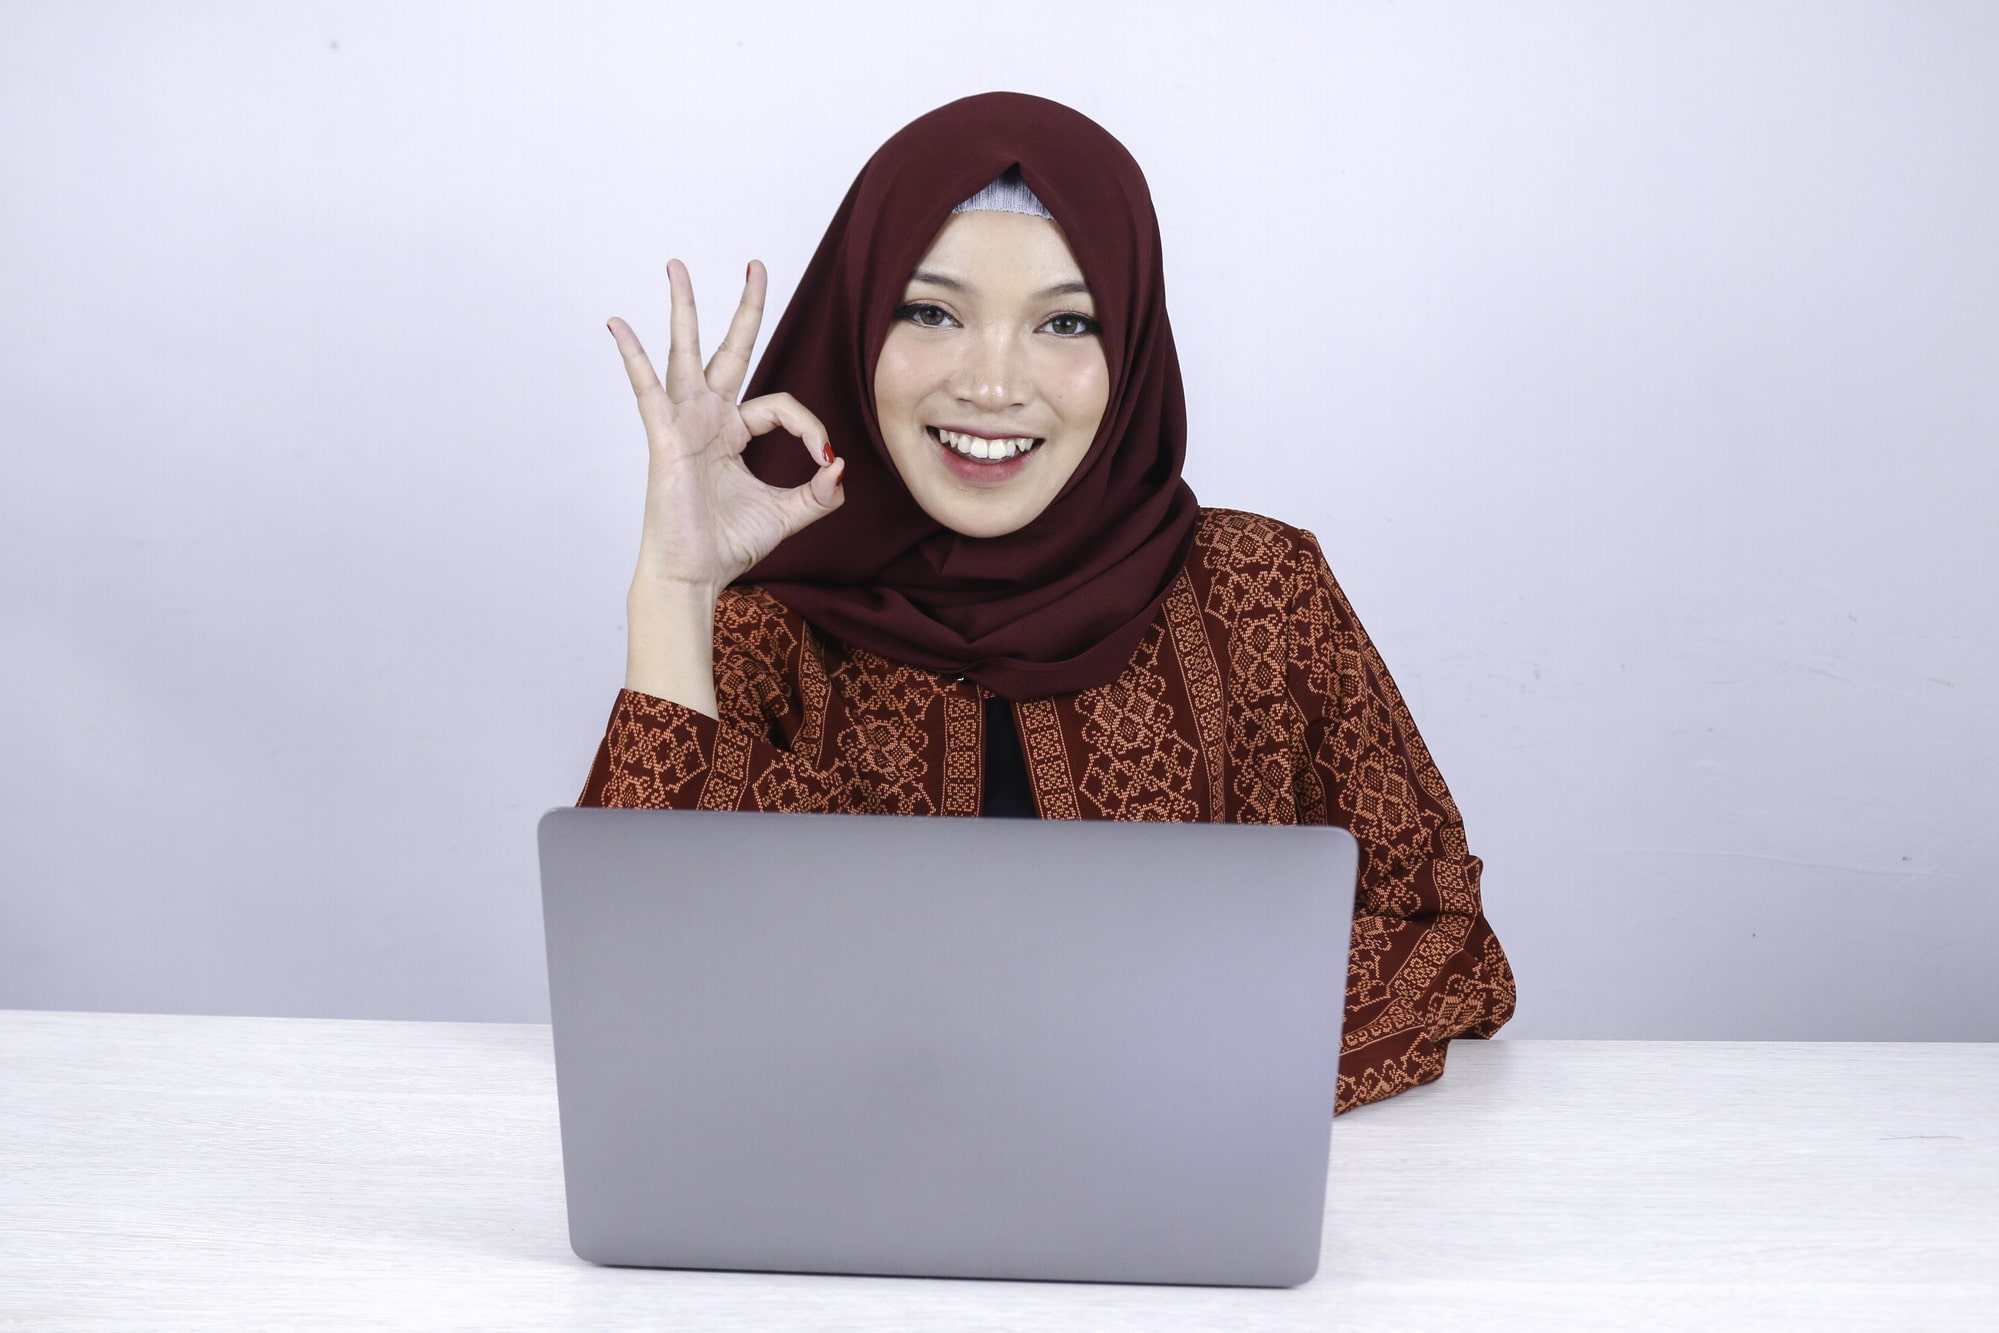 Indonesian Muslim cryptocurrency enthusiasts find a way around Islamic fatwa